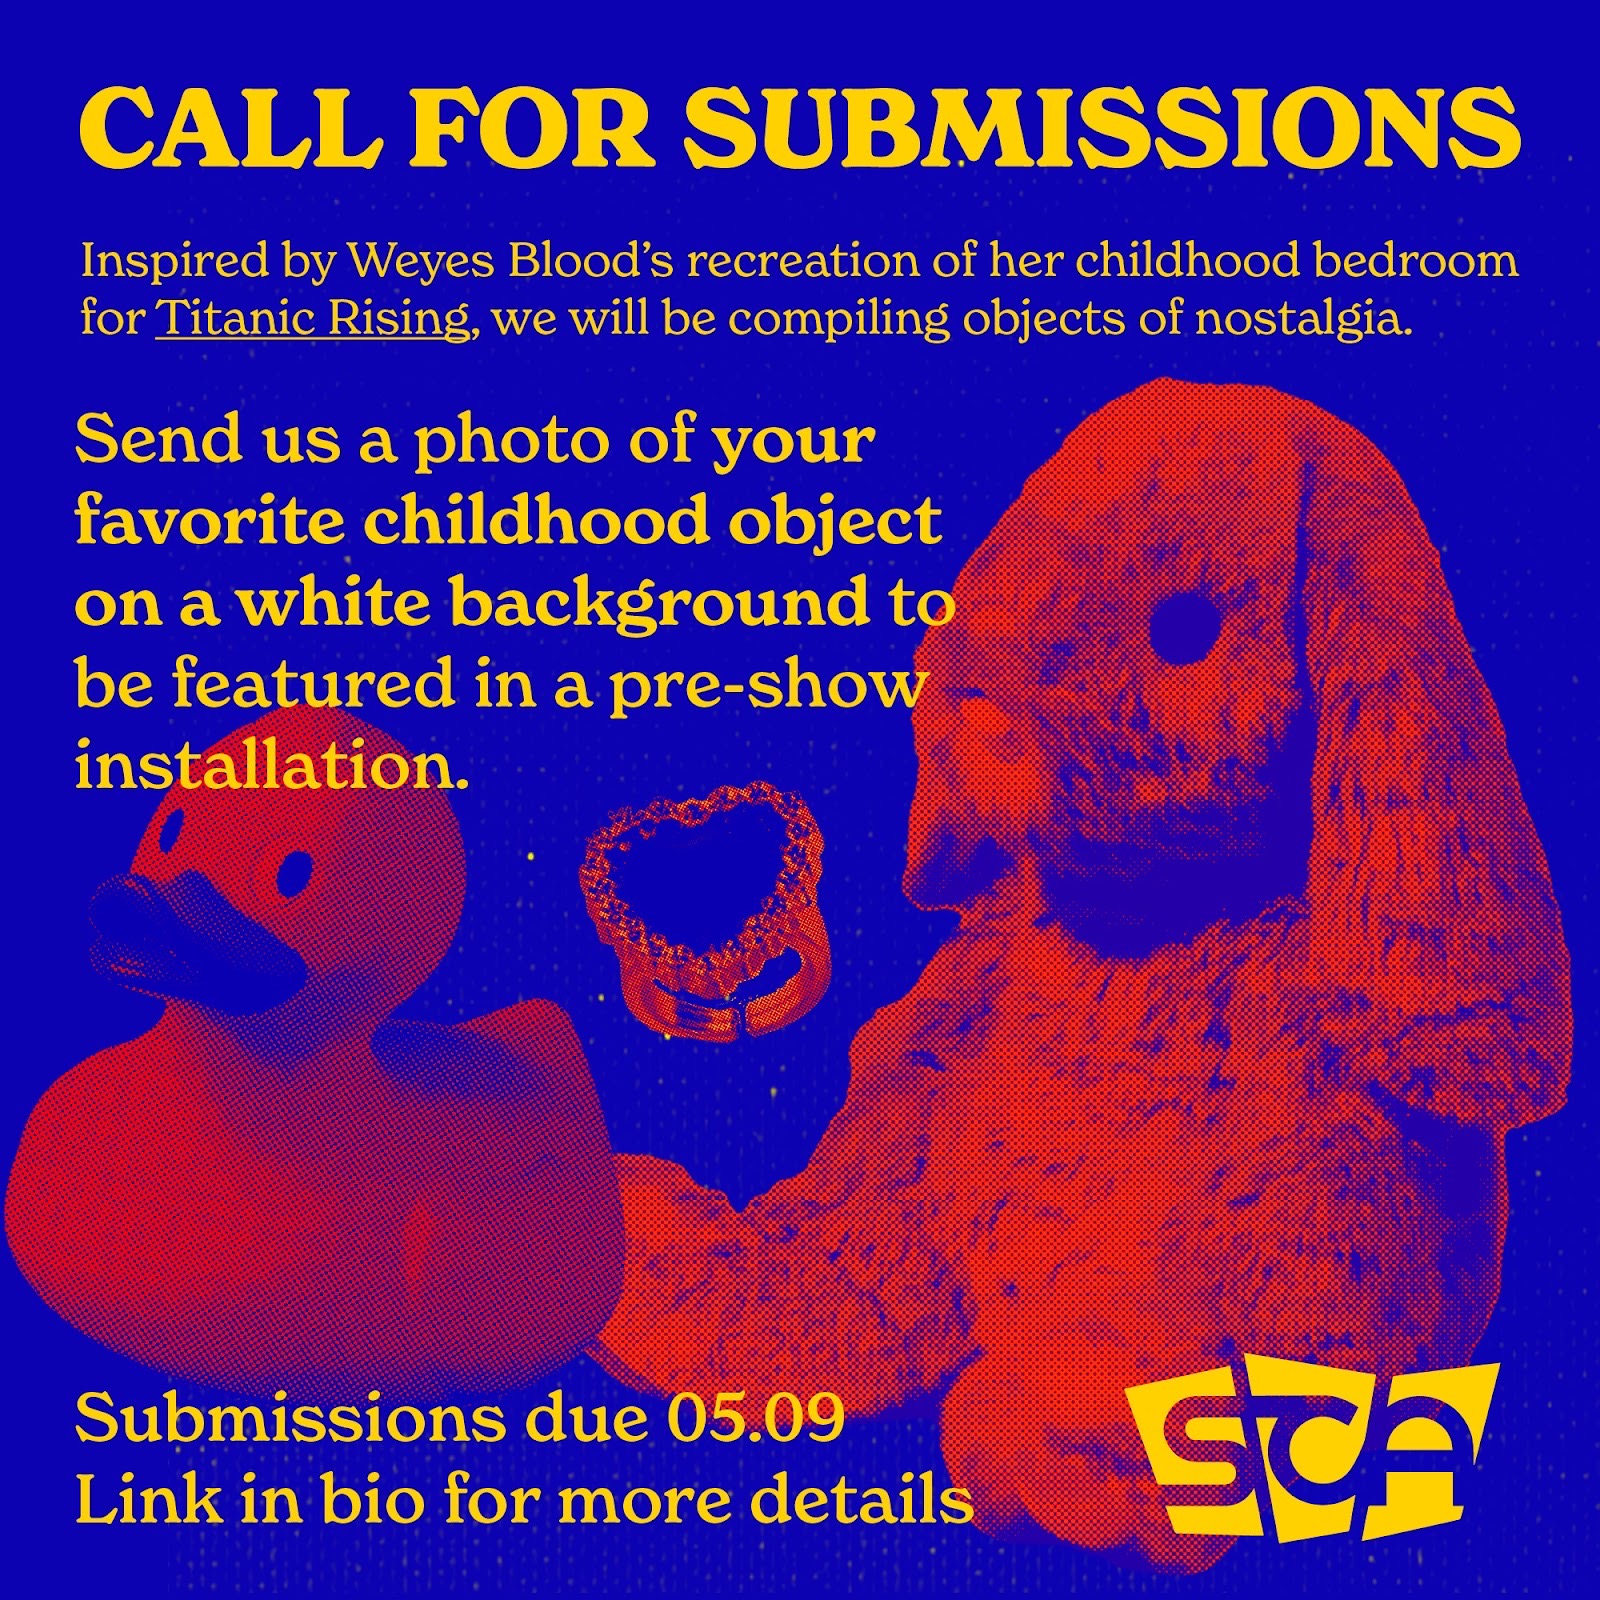 Call For Submissions 05.09